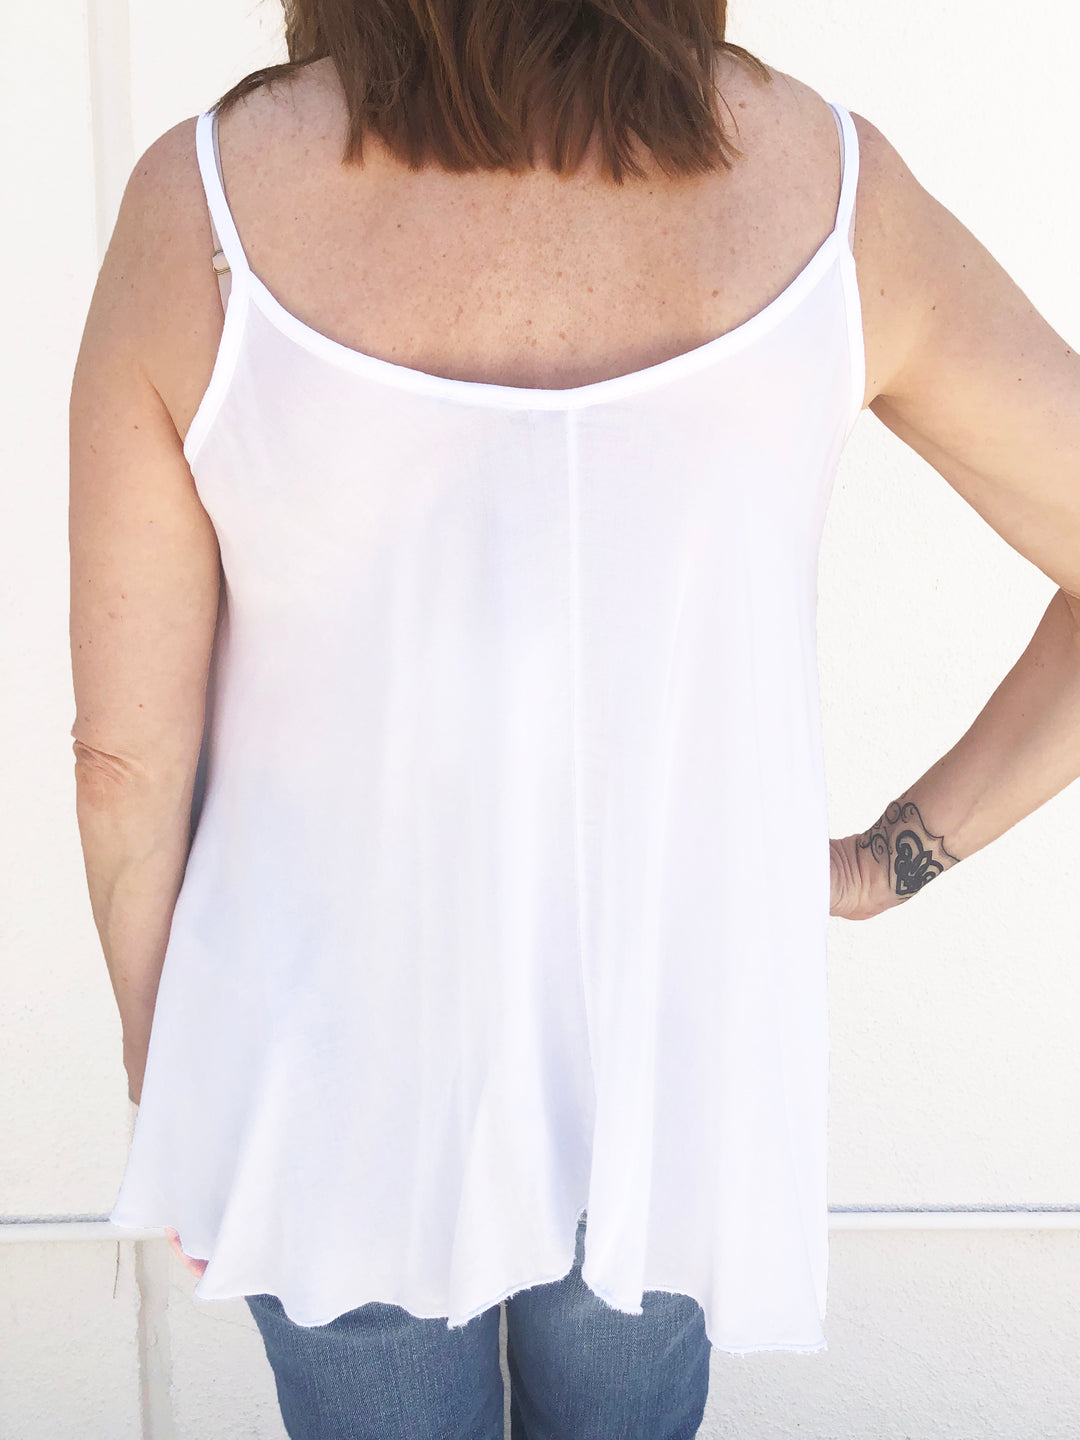 White Camisole Tank - Kingfisher Road - Online Boutique